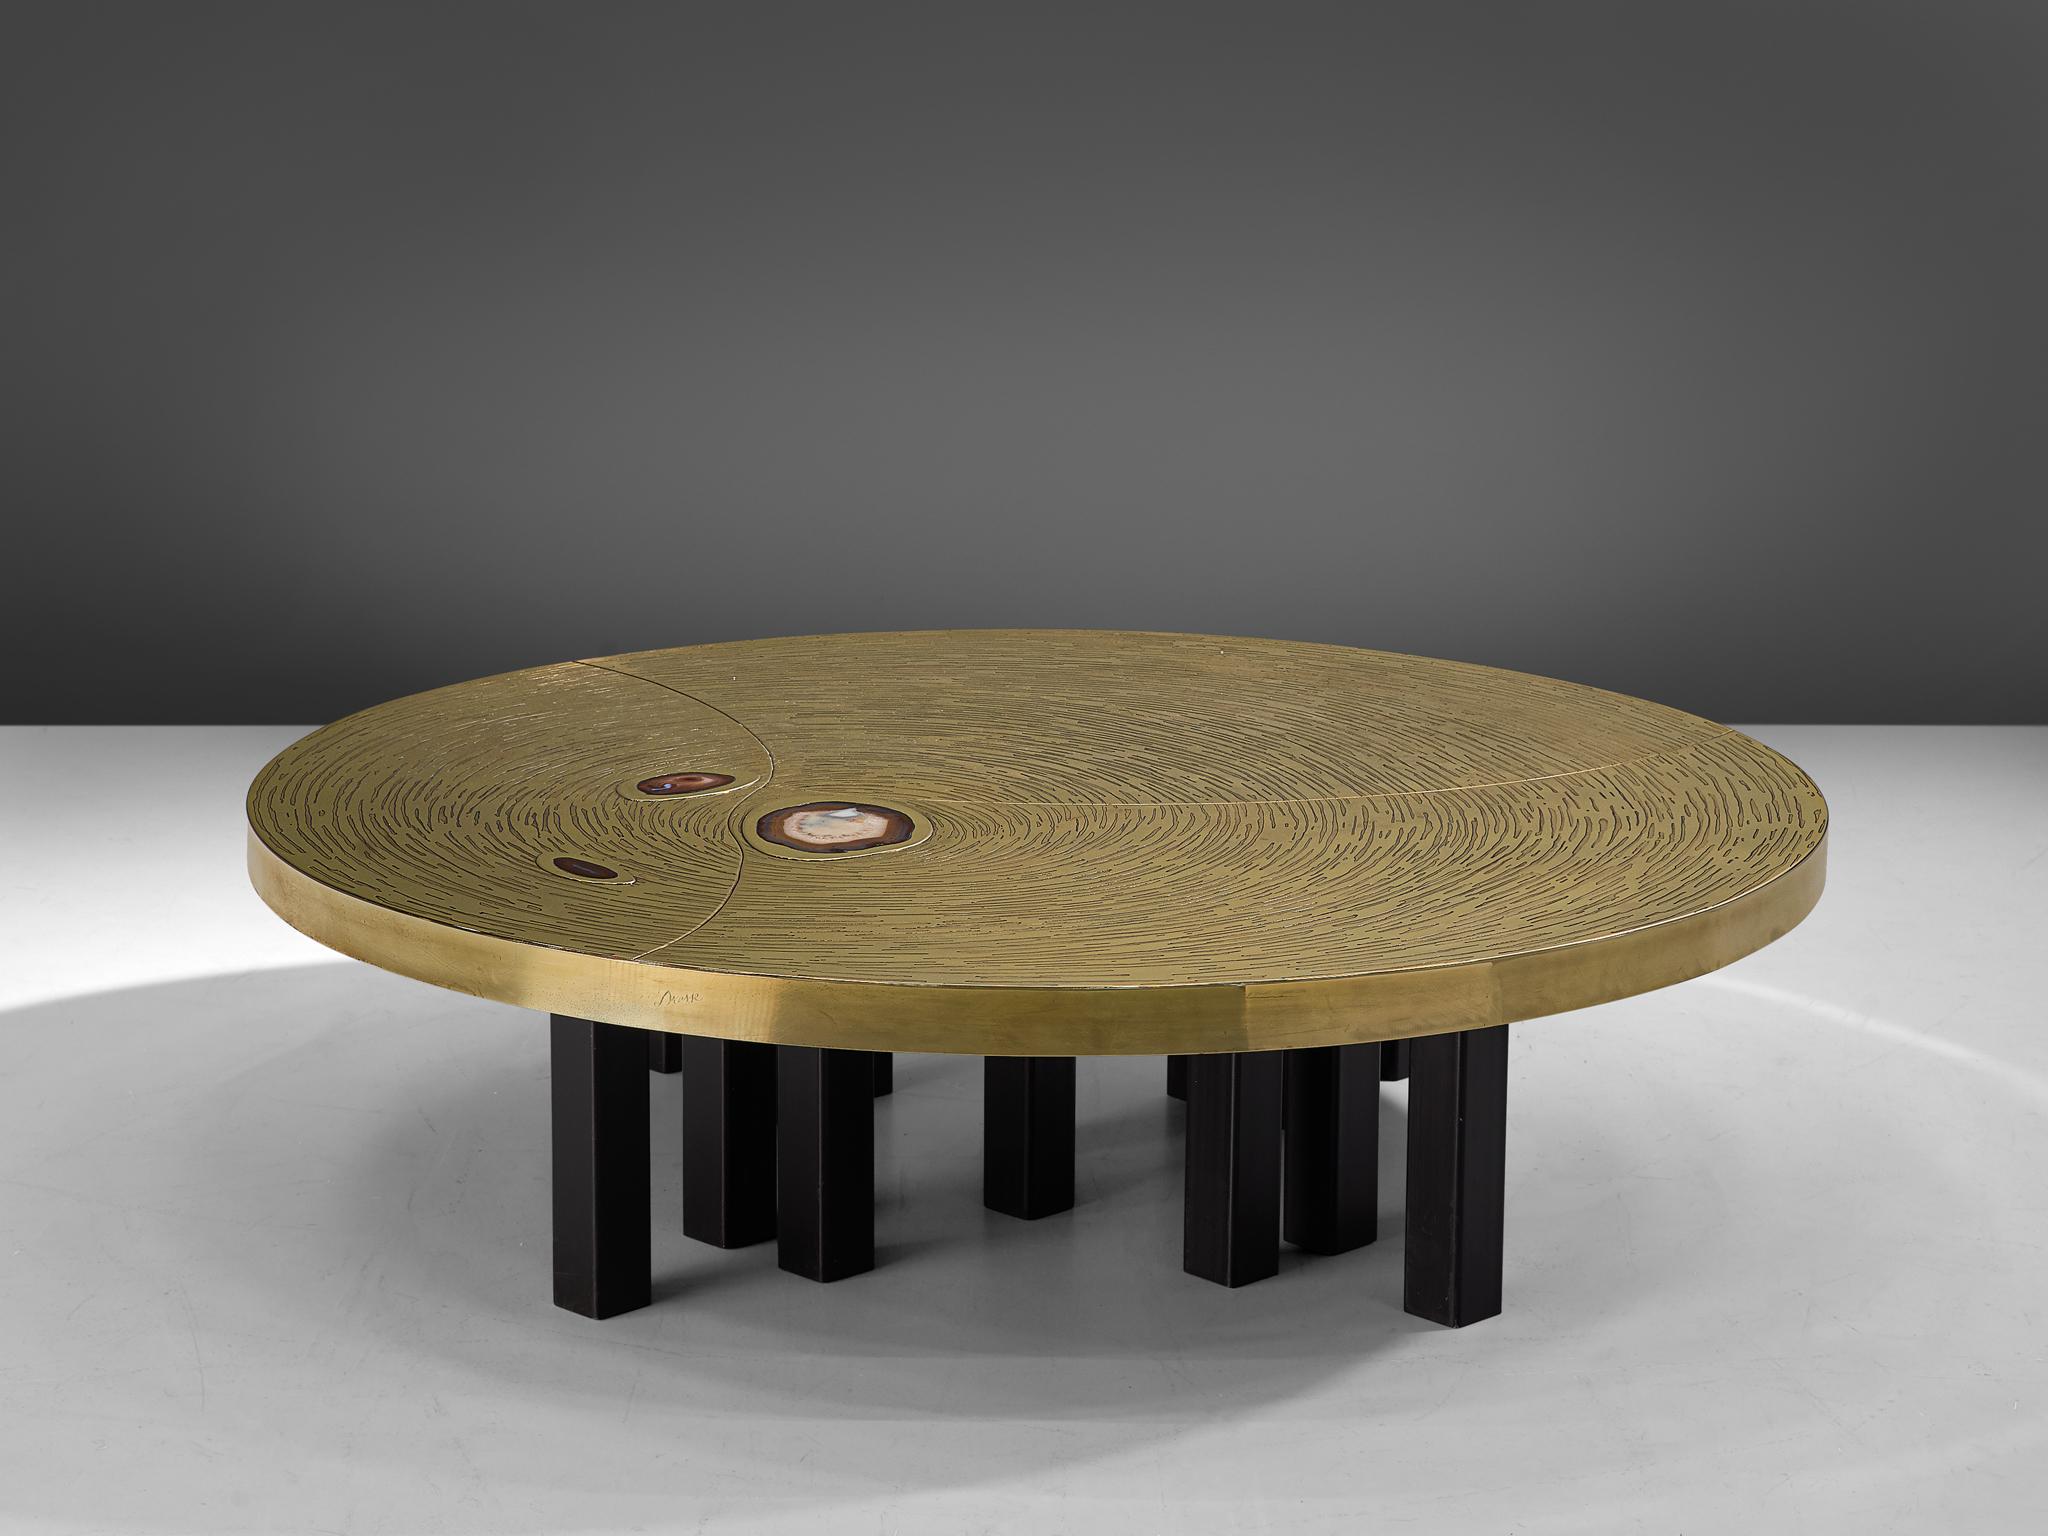 Jean Claude Dresse, coffee table, brass, steel and agate, Belgium, circa 1970.

A luxurious round cocktail table, crafted with high attention for detail which is characteristic for the work of the Belgian artist Jean Claude Dresse. The piece is